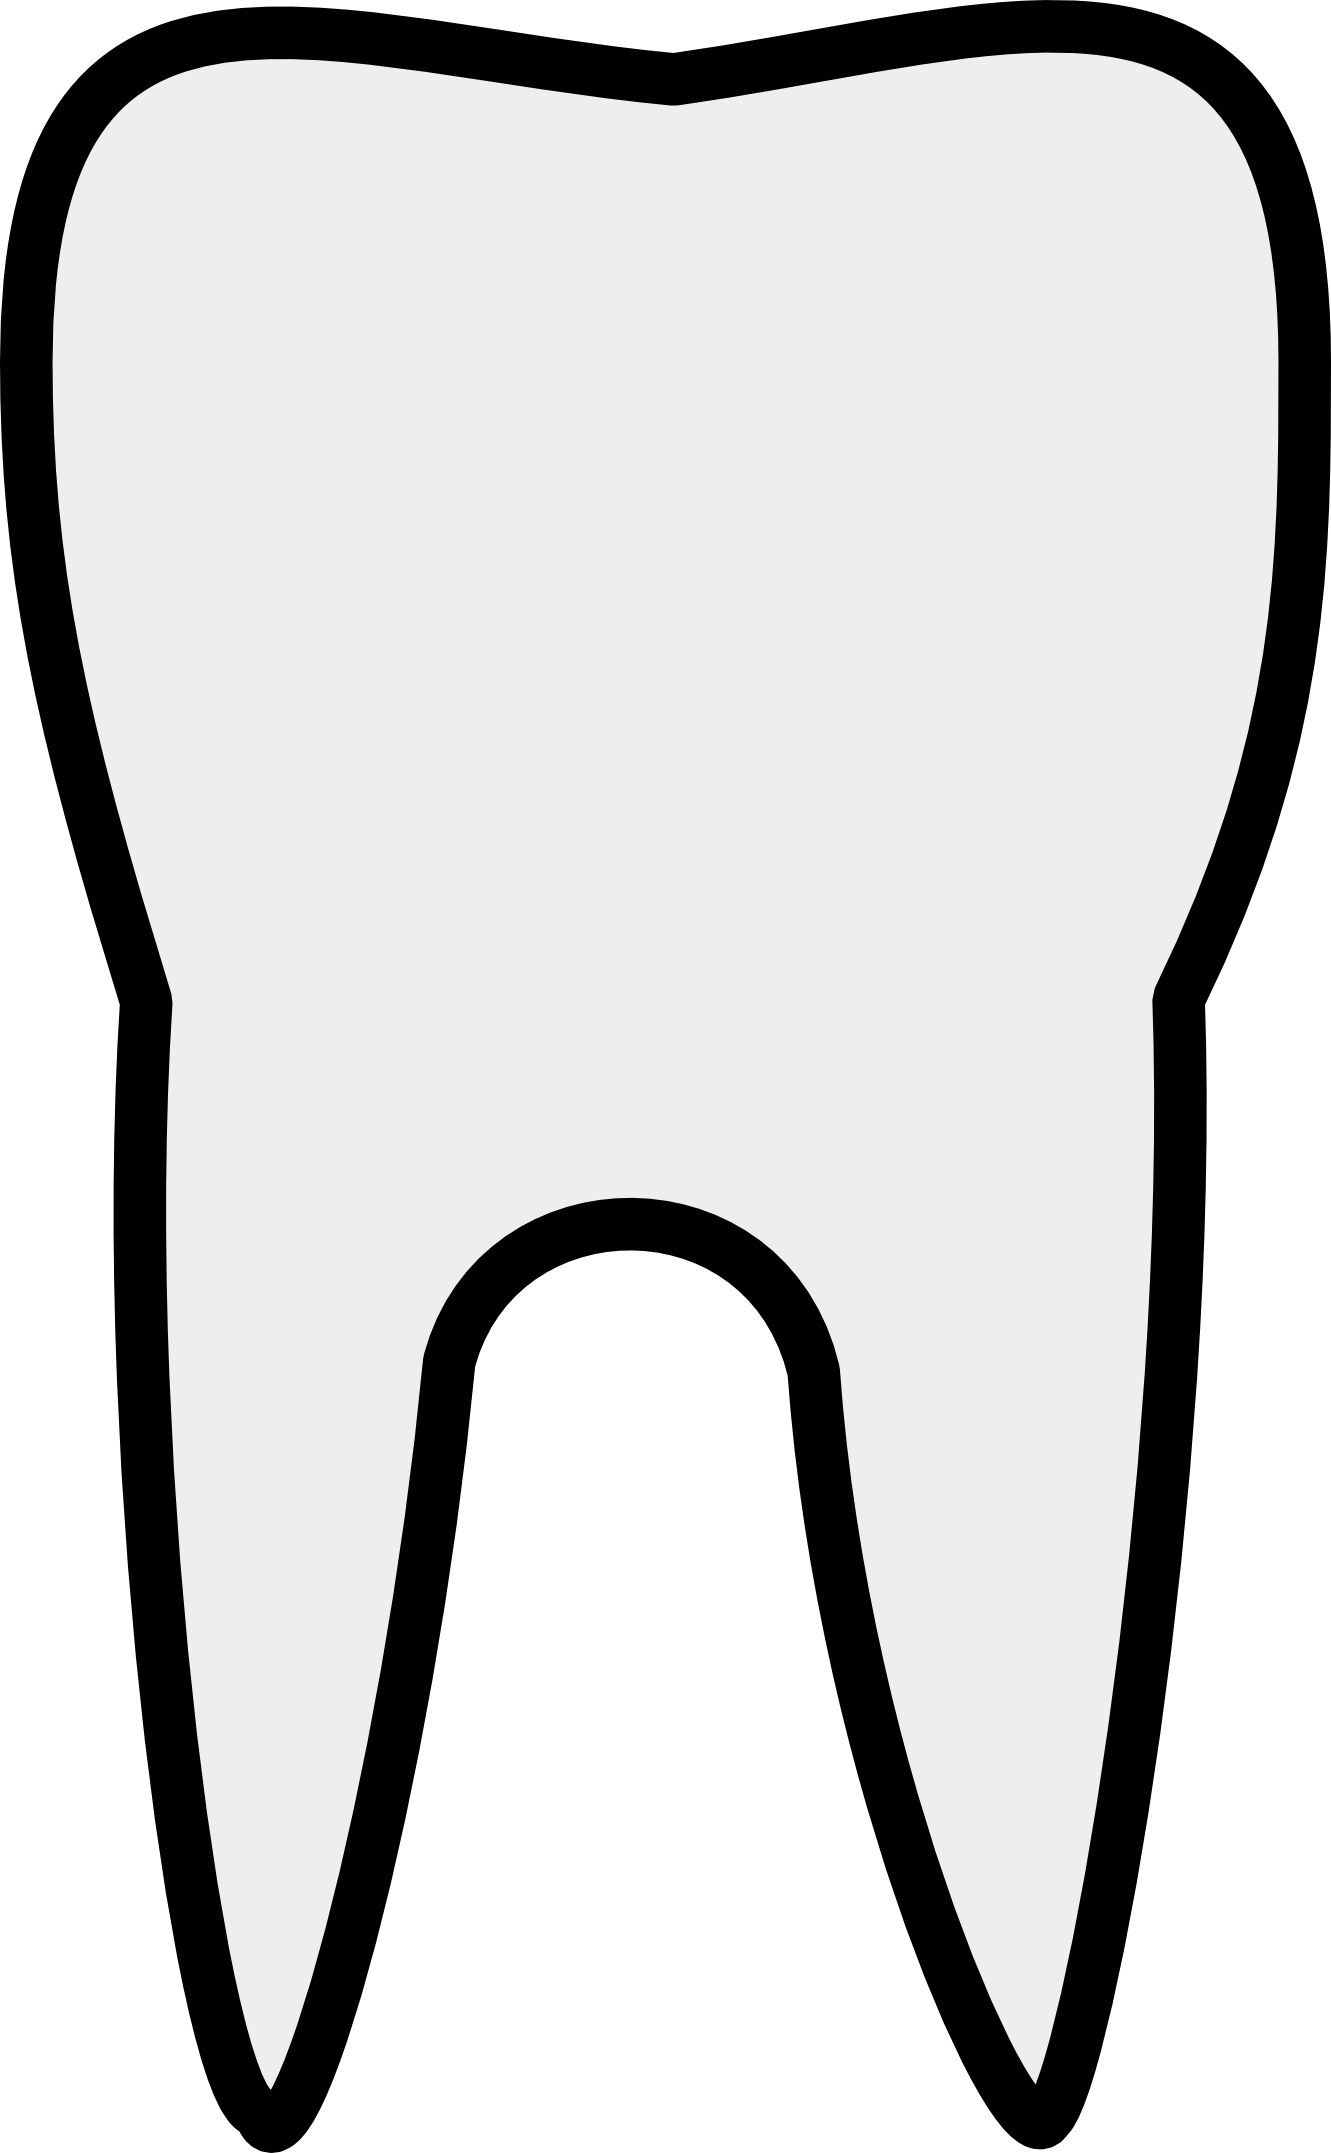 Tooth cartoon images clipart image #11809